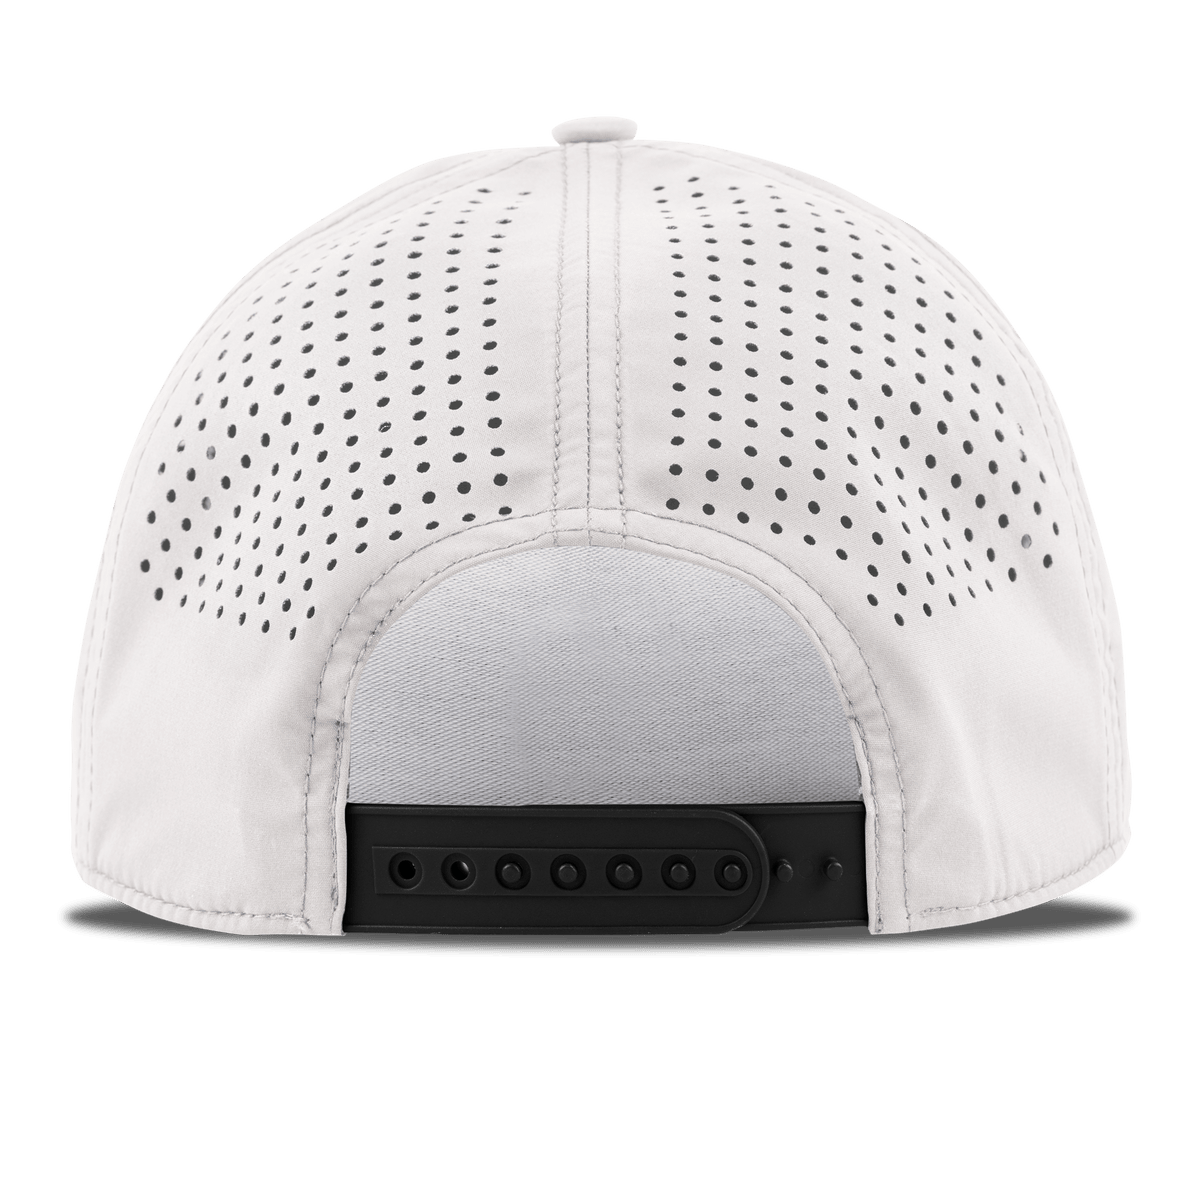 New Mexico Vintage Curved 5 Panel Performance Back White/Black